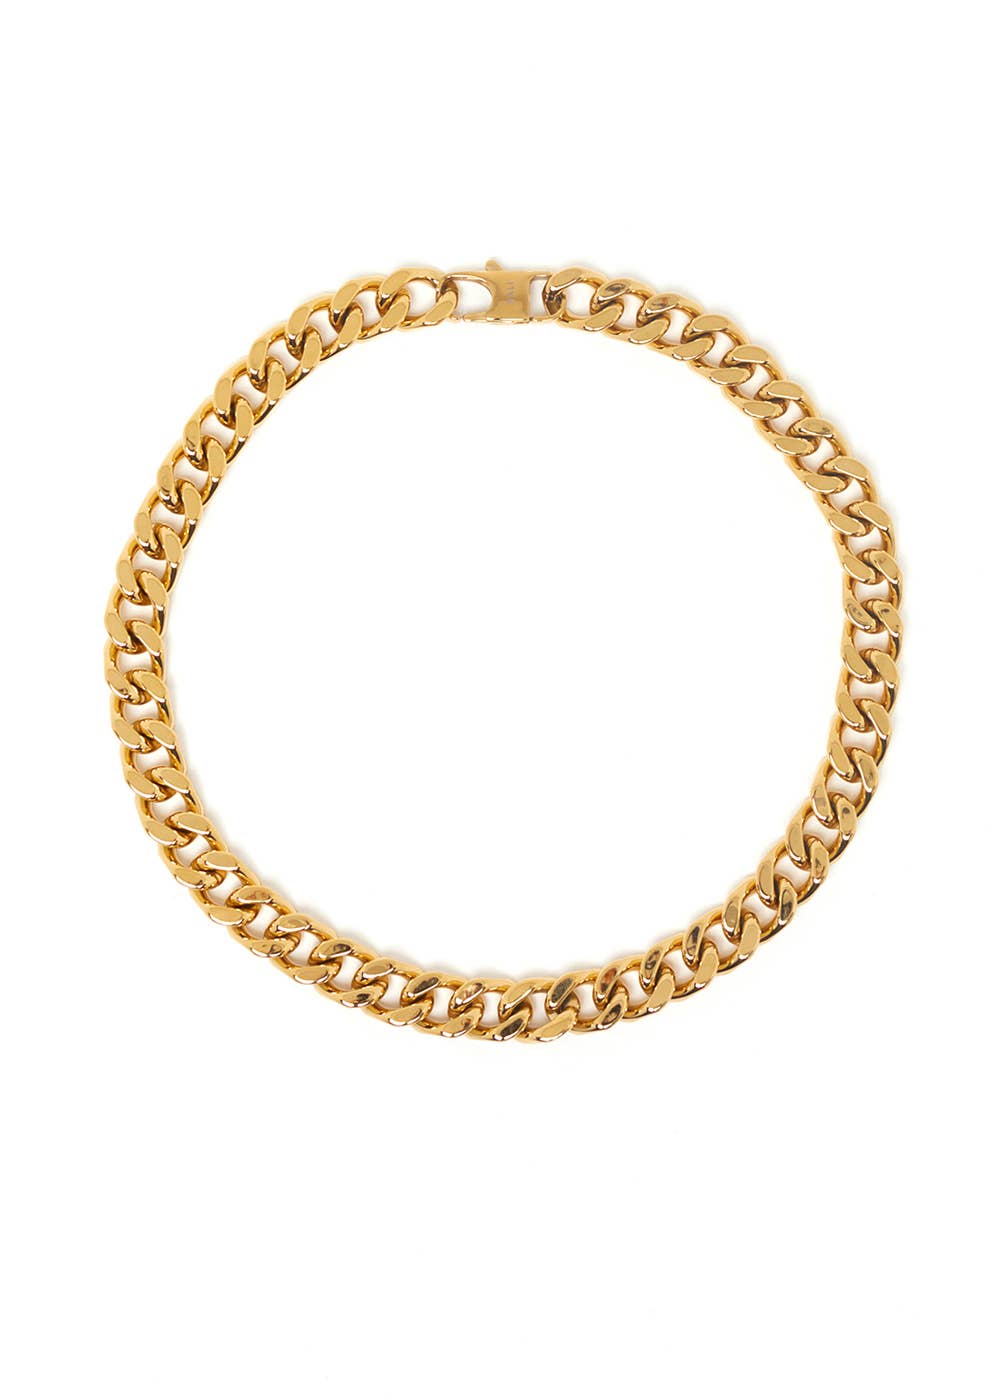 Jasmin chain necklace in gold stainless steel